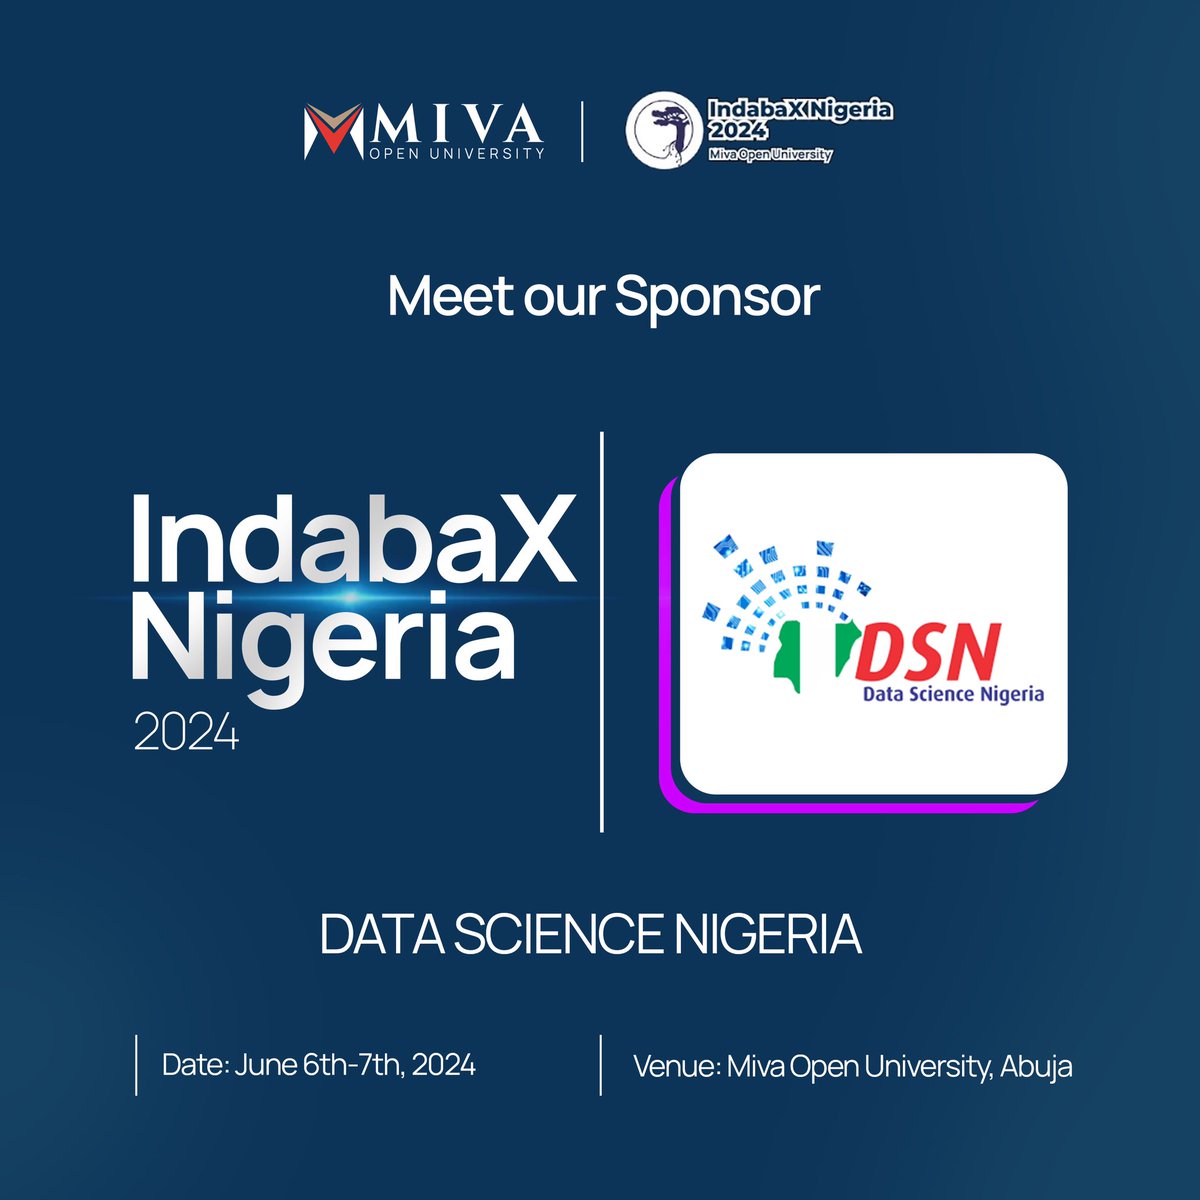 As we countdown to 2weeks to #indabaxnigeria2024, we will not be silent about the support we have received from @dsn_ai_network for the conference. A big shout to the work the community is doing to grow data talent in Nigeria and beyond.